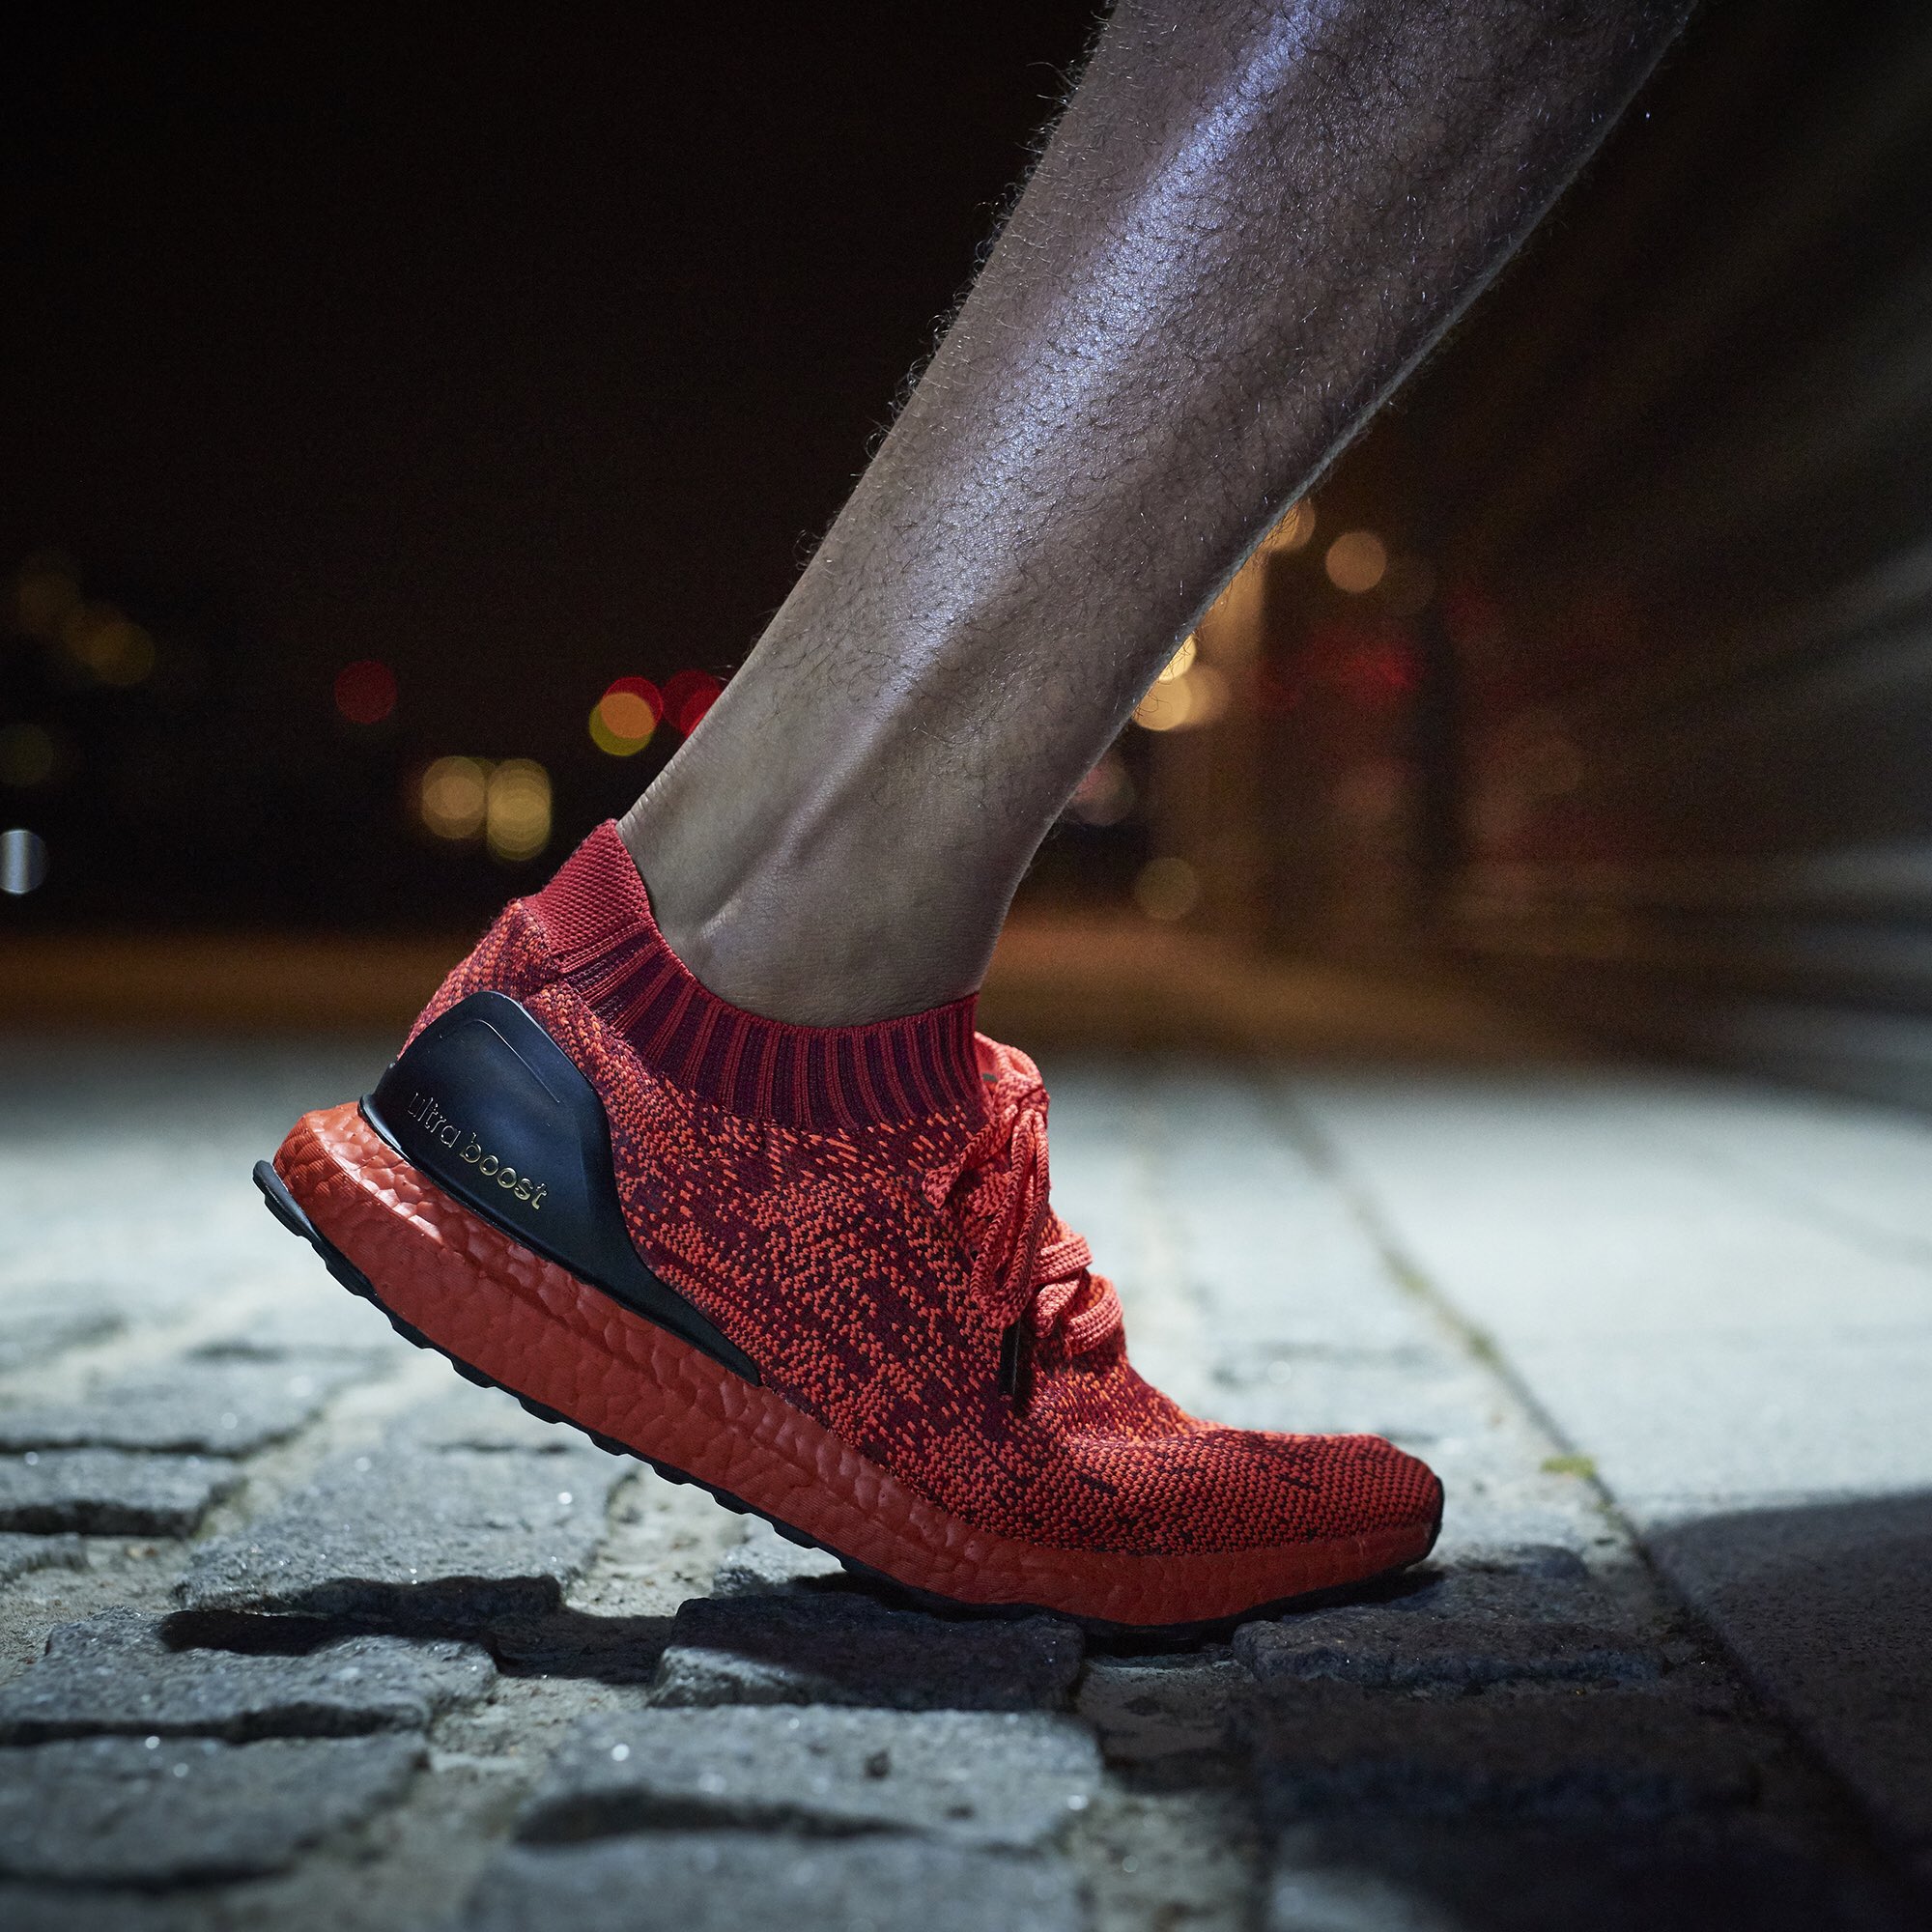 Adidas Ultraboost Uncaged Red Boost (1)